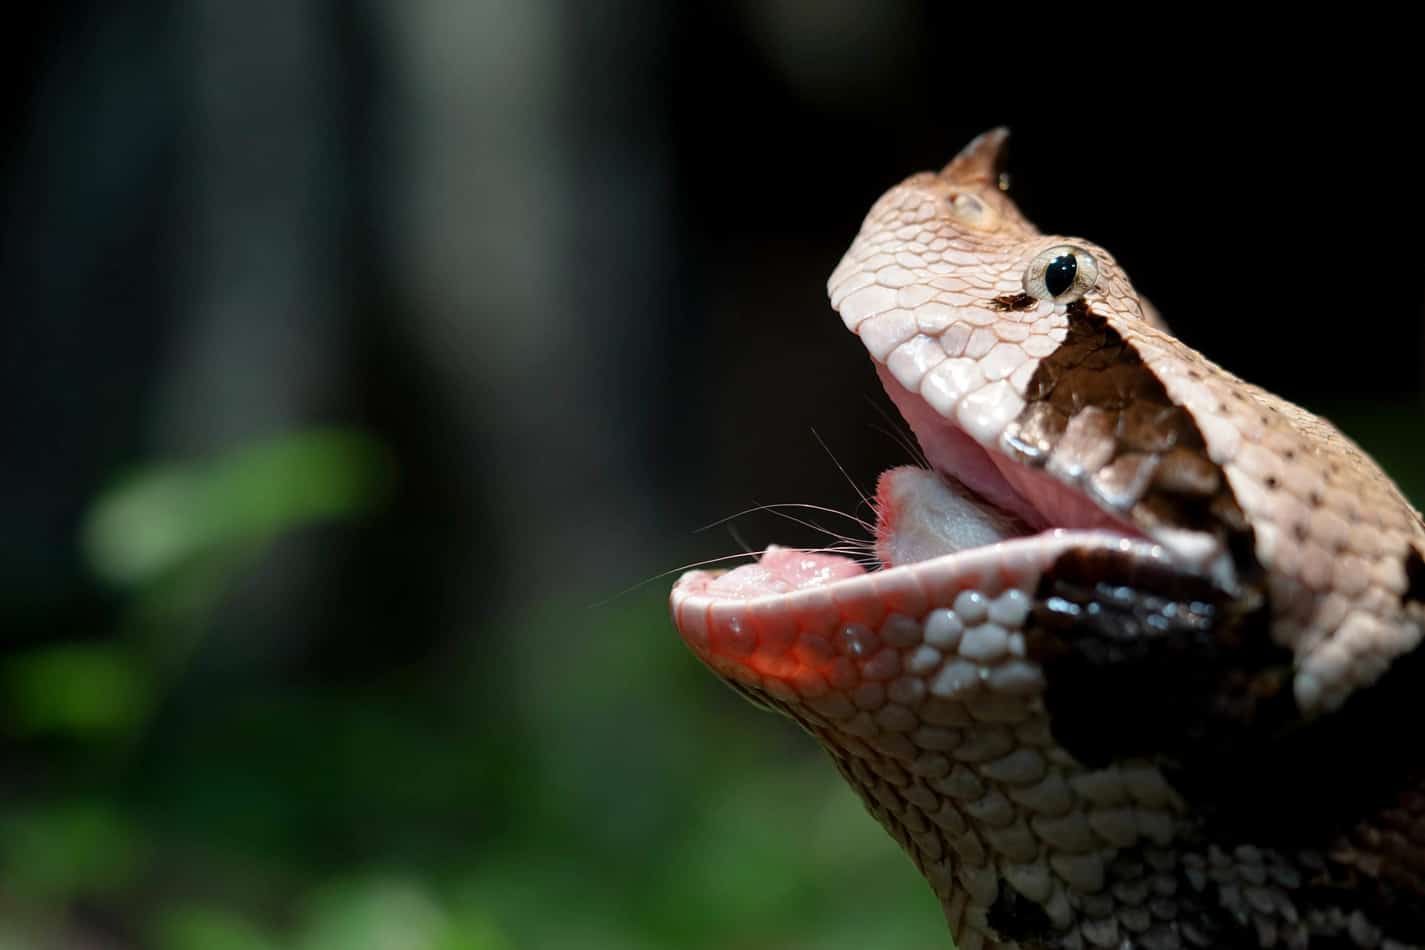 gaboon viper the complete guide 3 Gaboon Viper: The Complete Guide With Pictures and Facts